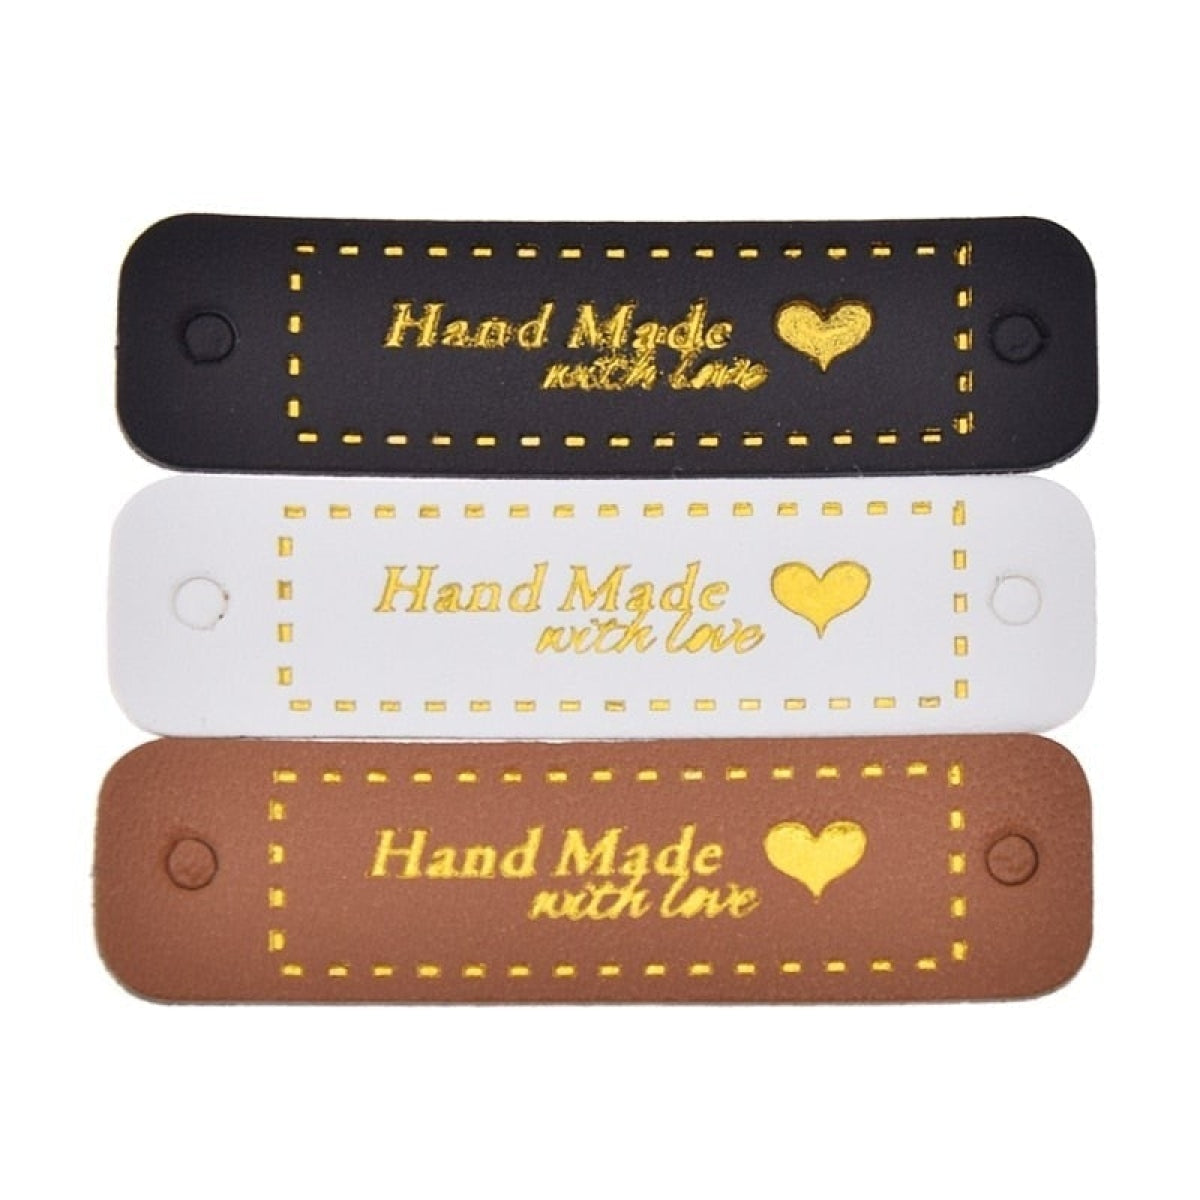 8Pcs Pu Leather Label Tags Gold Writing Handmade With Love For Clothes Bags Garment Labels For Jeans